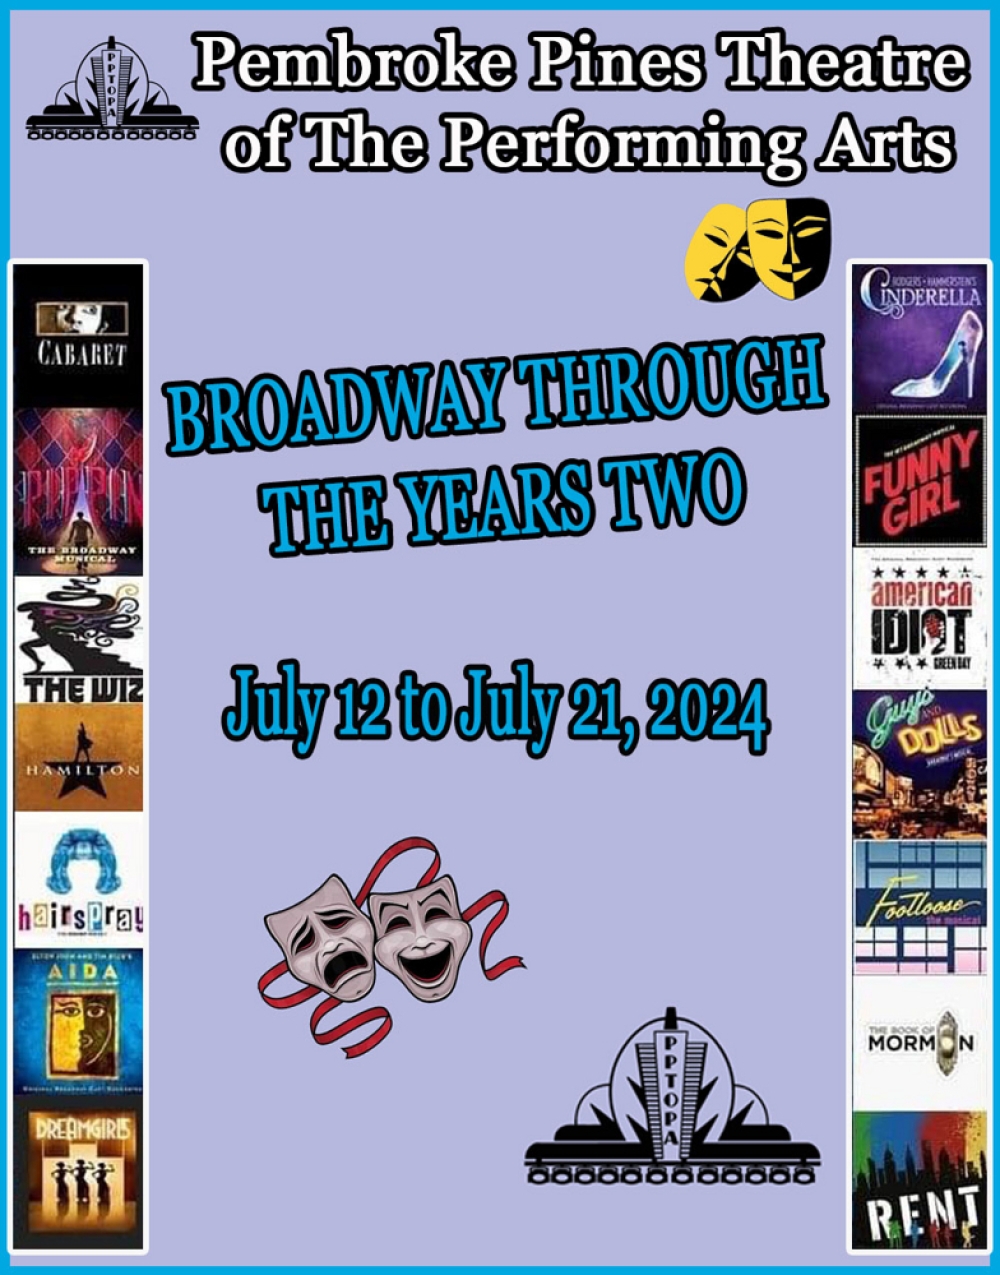 Broadway Through The Years Two at Pembroke Pines Theatre of the Performing Arts